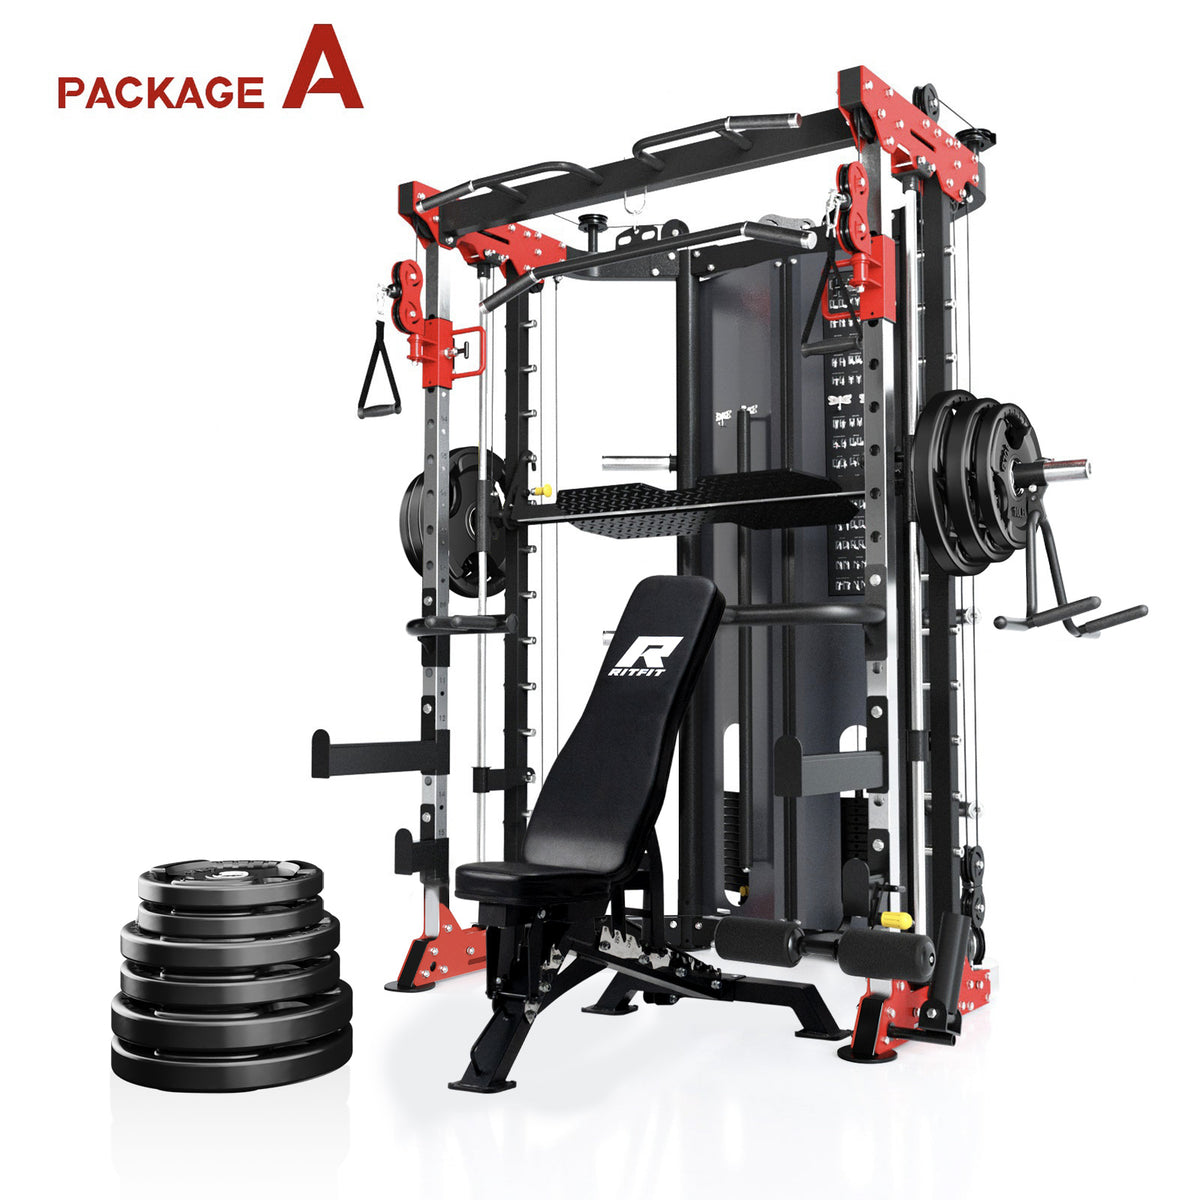 RitFit BPC05 Smith Machine Home Gym Package - RitFit